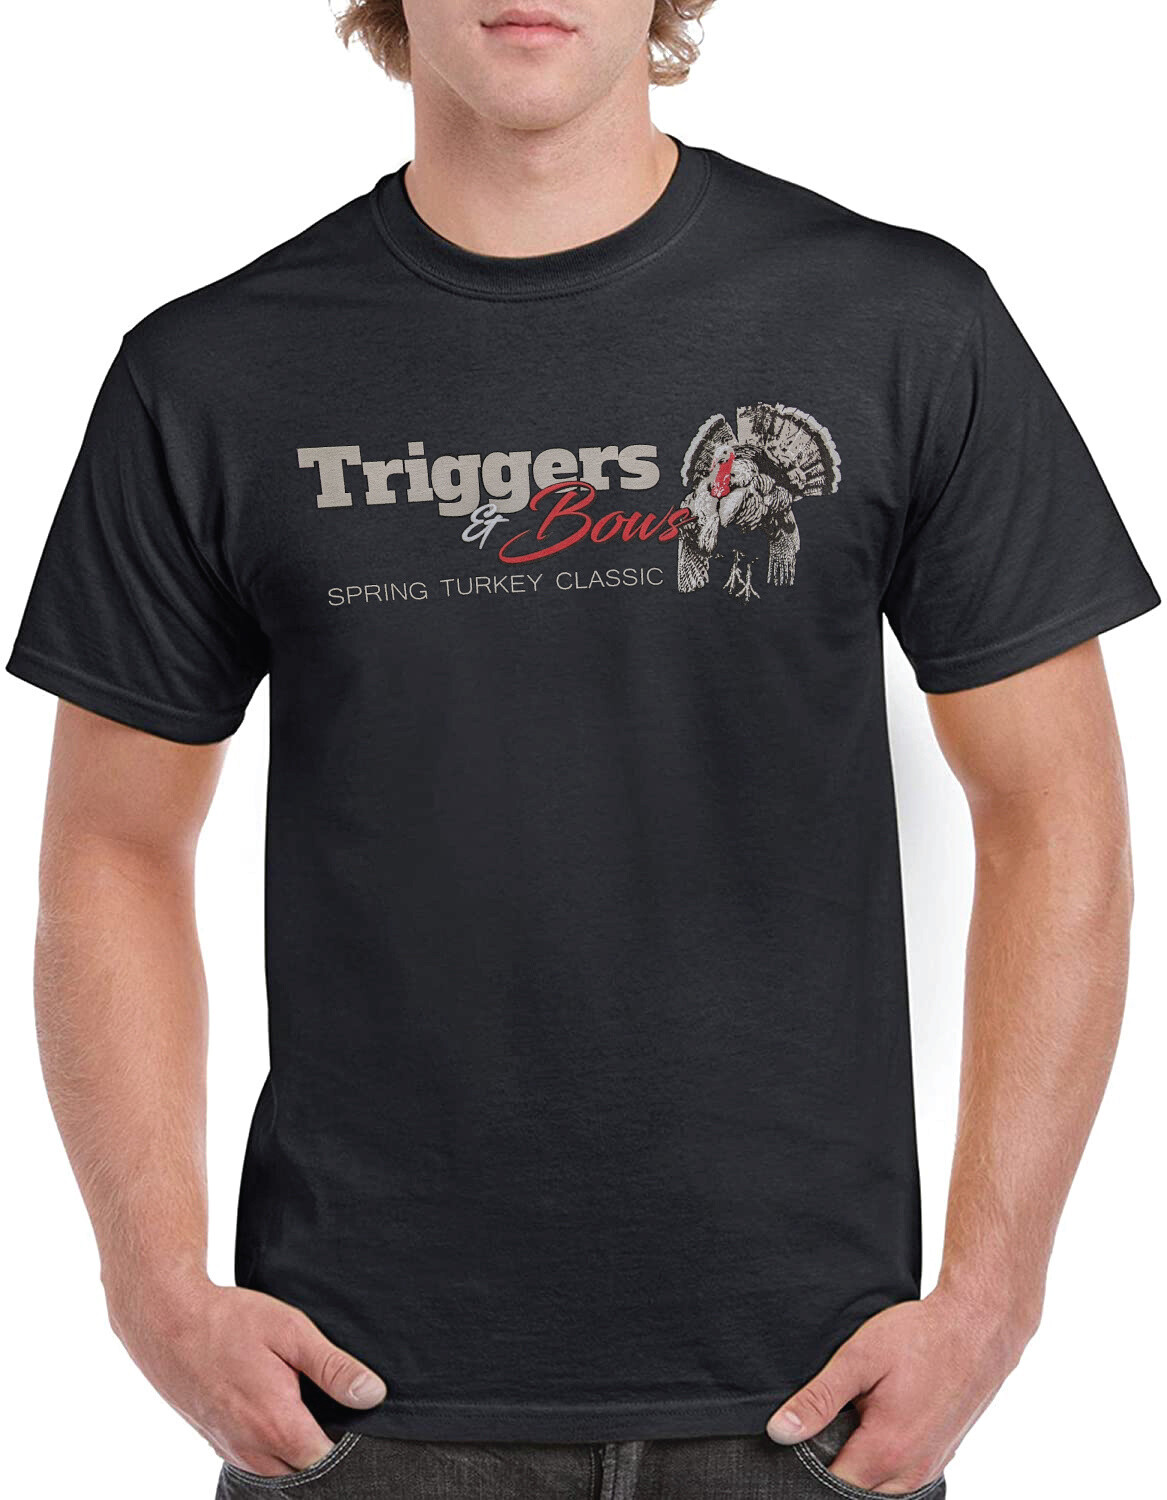 Triggers and Bows Spring Turkey Classic T-Shirt, Size: S